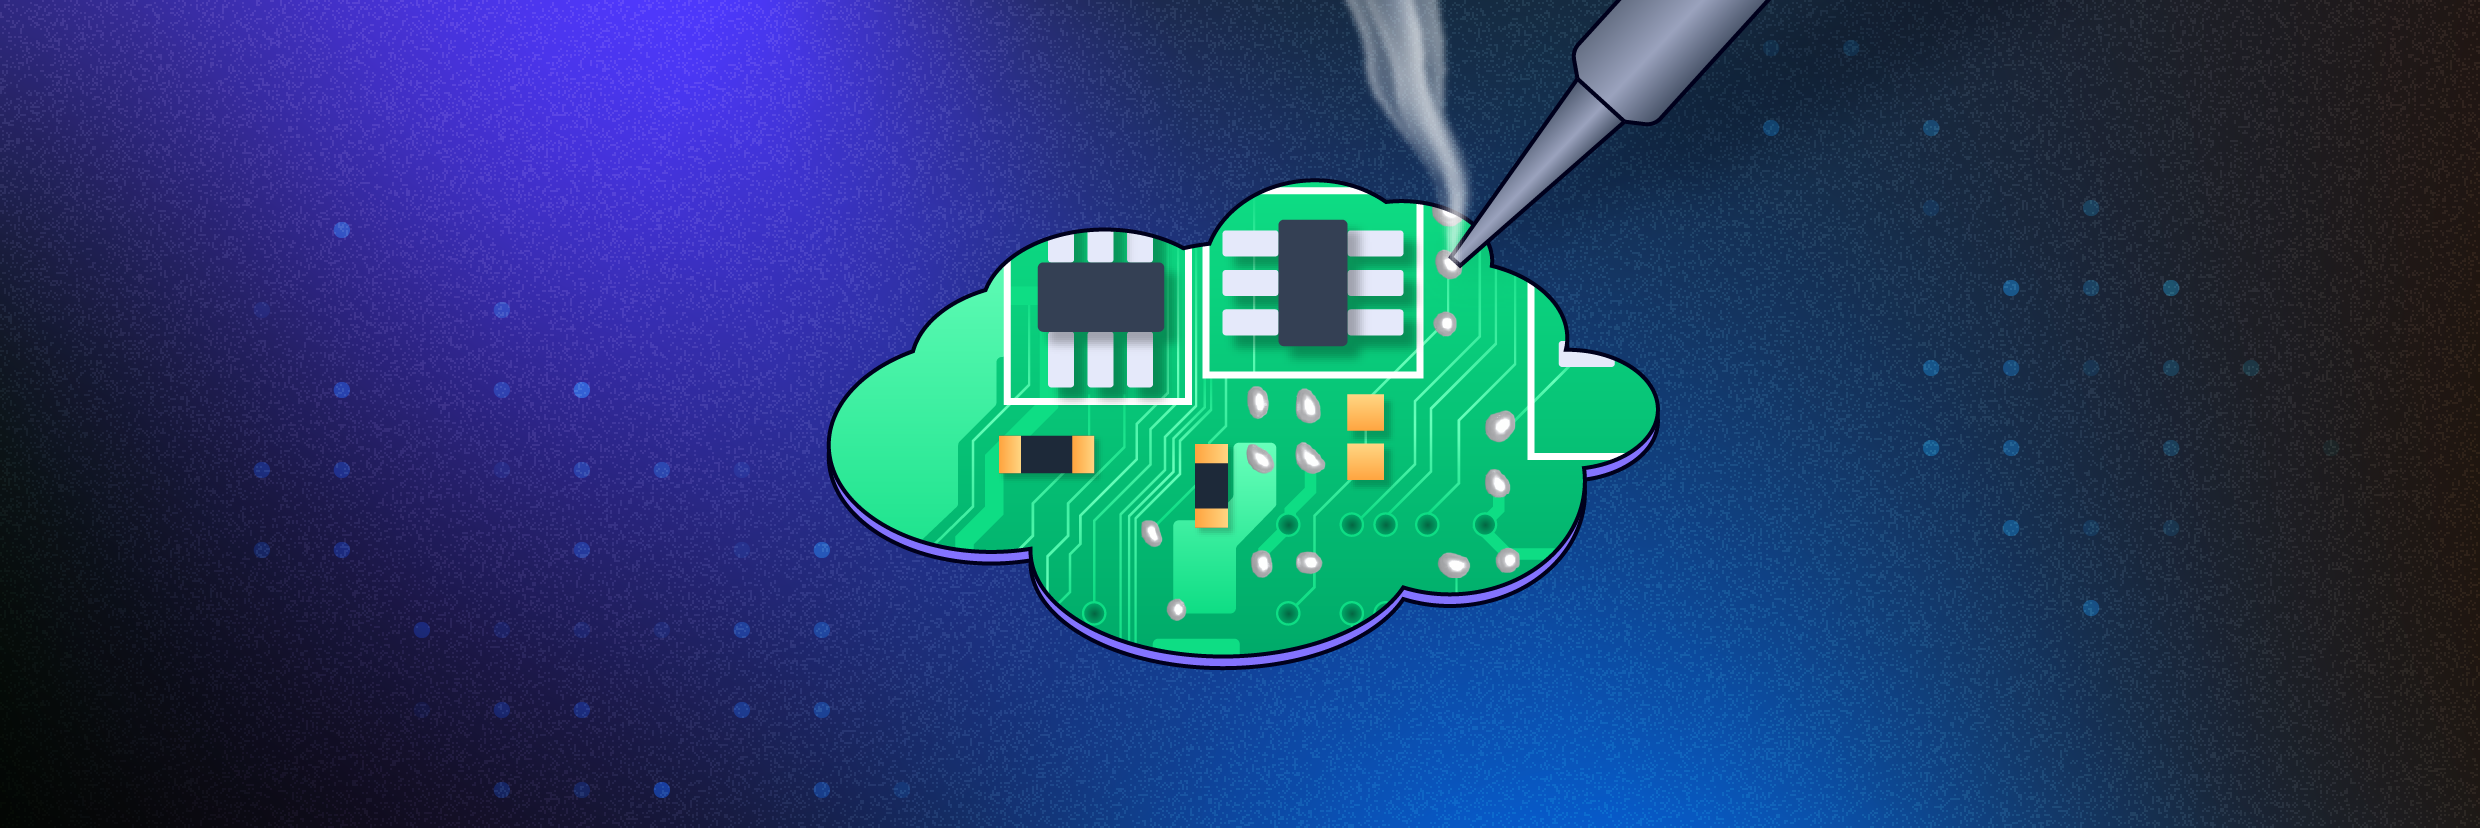 drive in the cloud being hacked, illustration